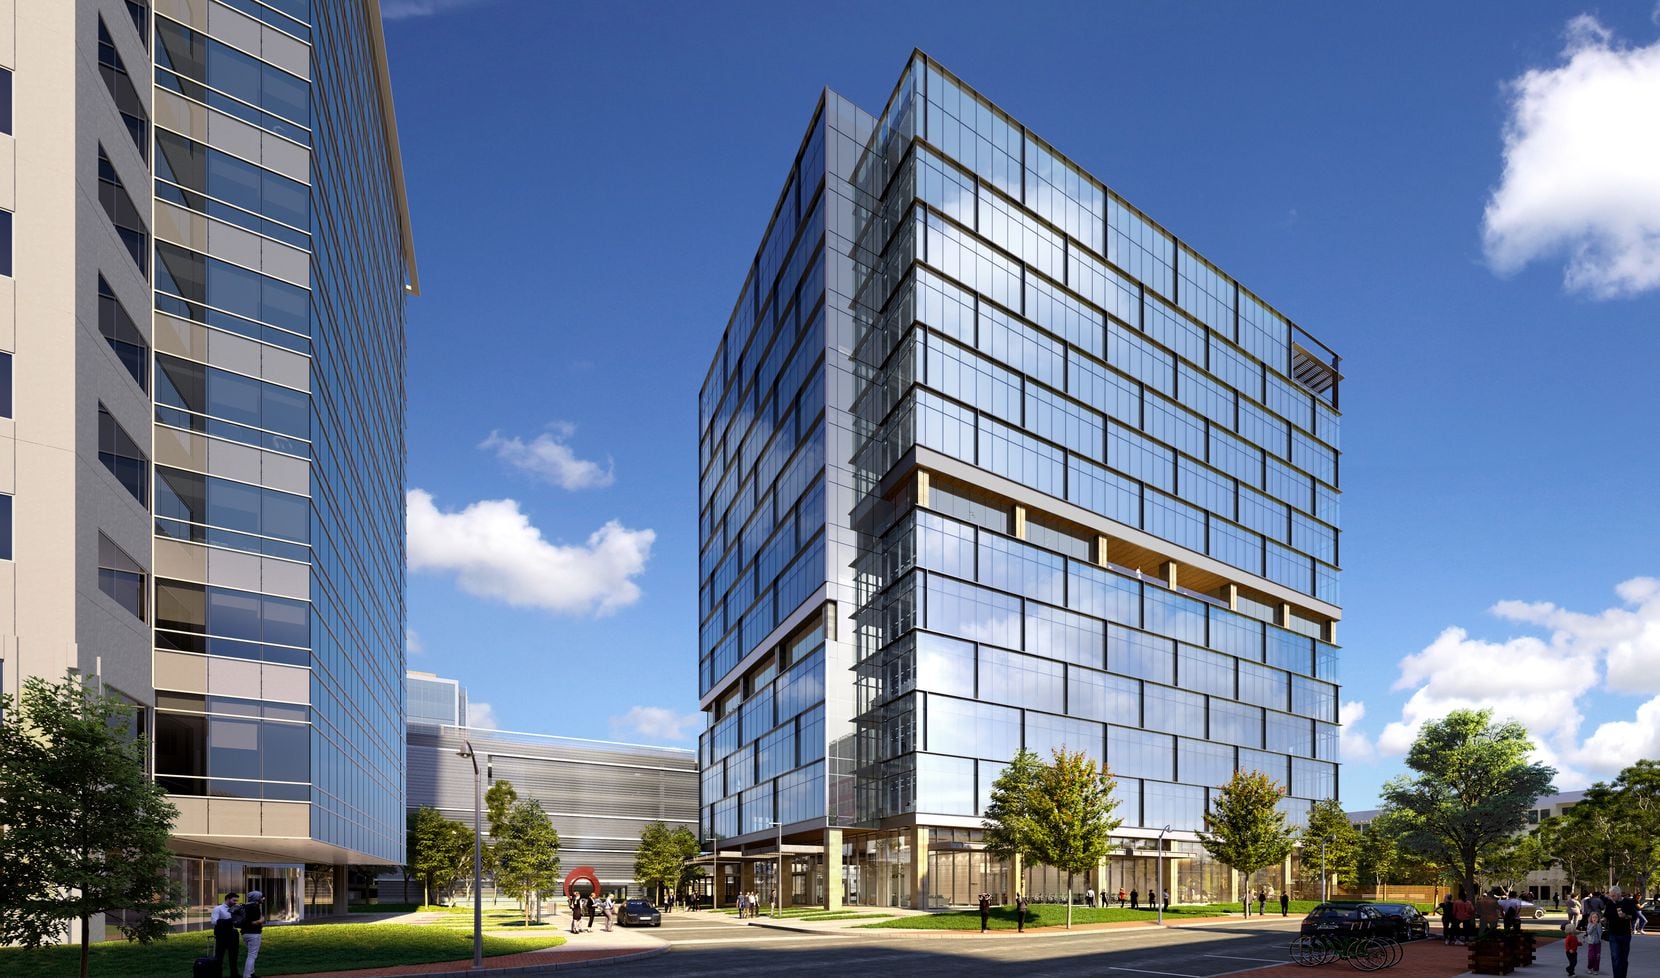 The Legacy Union Two office building planned next to Plano's Shops at Legacy will be 13 stories and is planned by developers Cousins Properties and Lincoln Property Co.